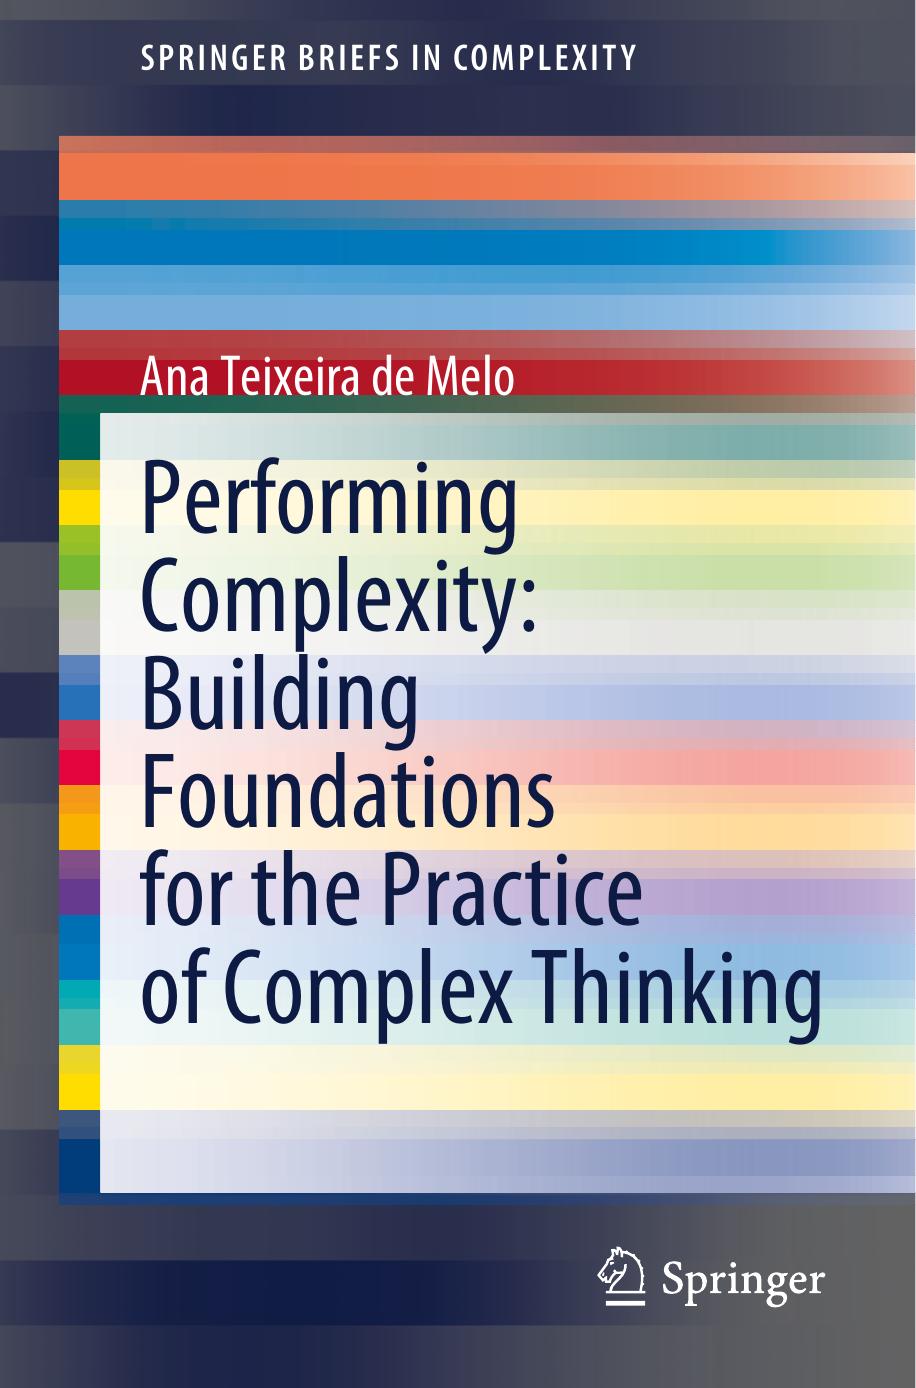 Performing Complexity: Building Foundations for the Practice of Complex Thinking by Ana Teixeira de Melo